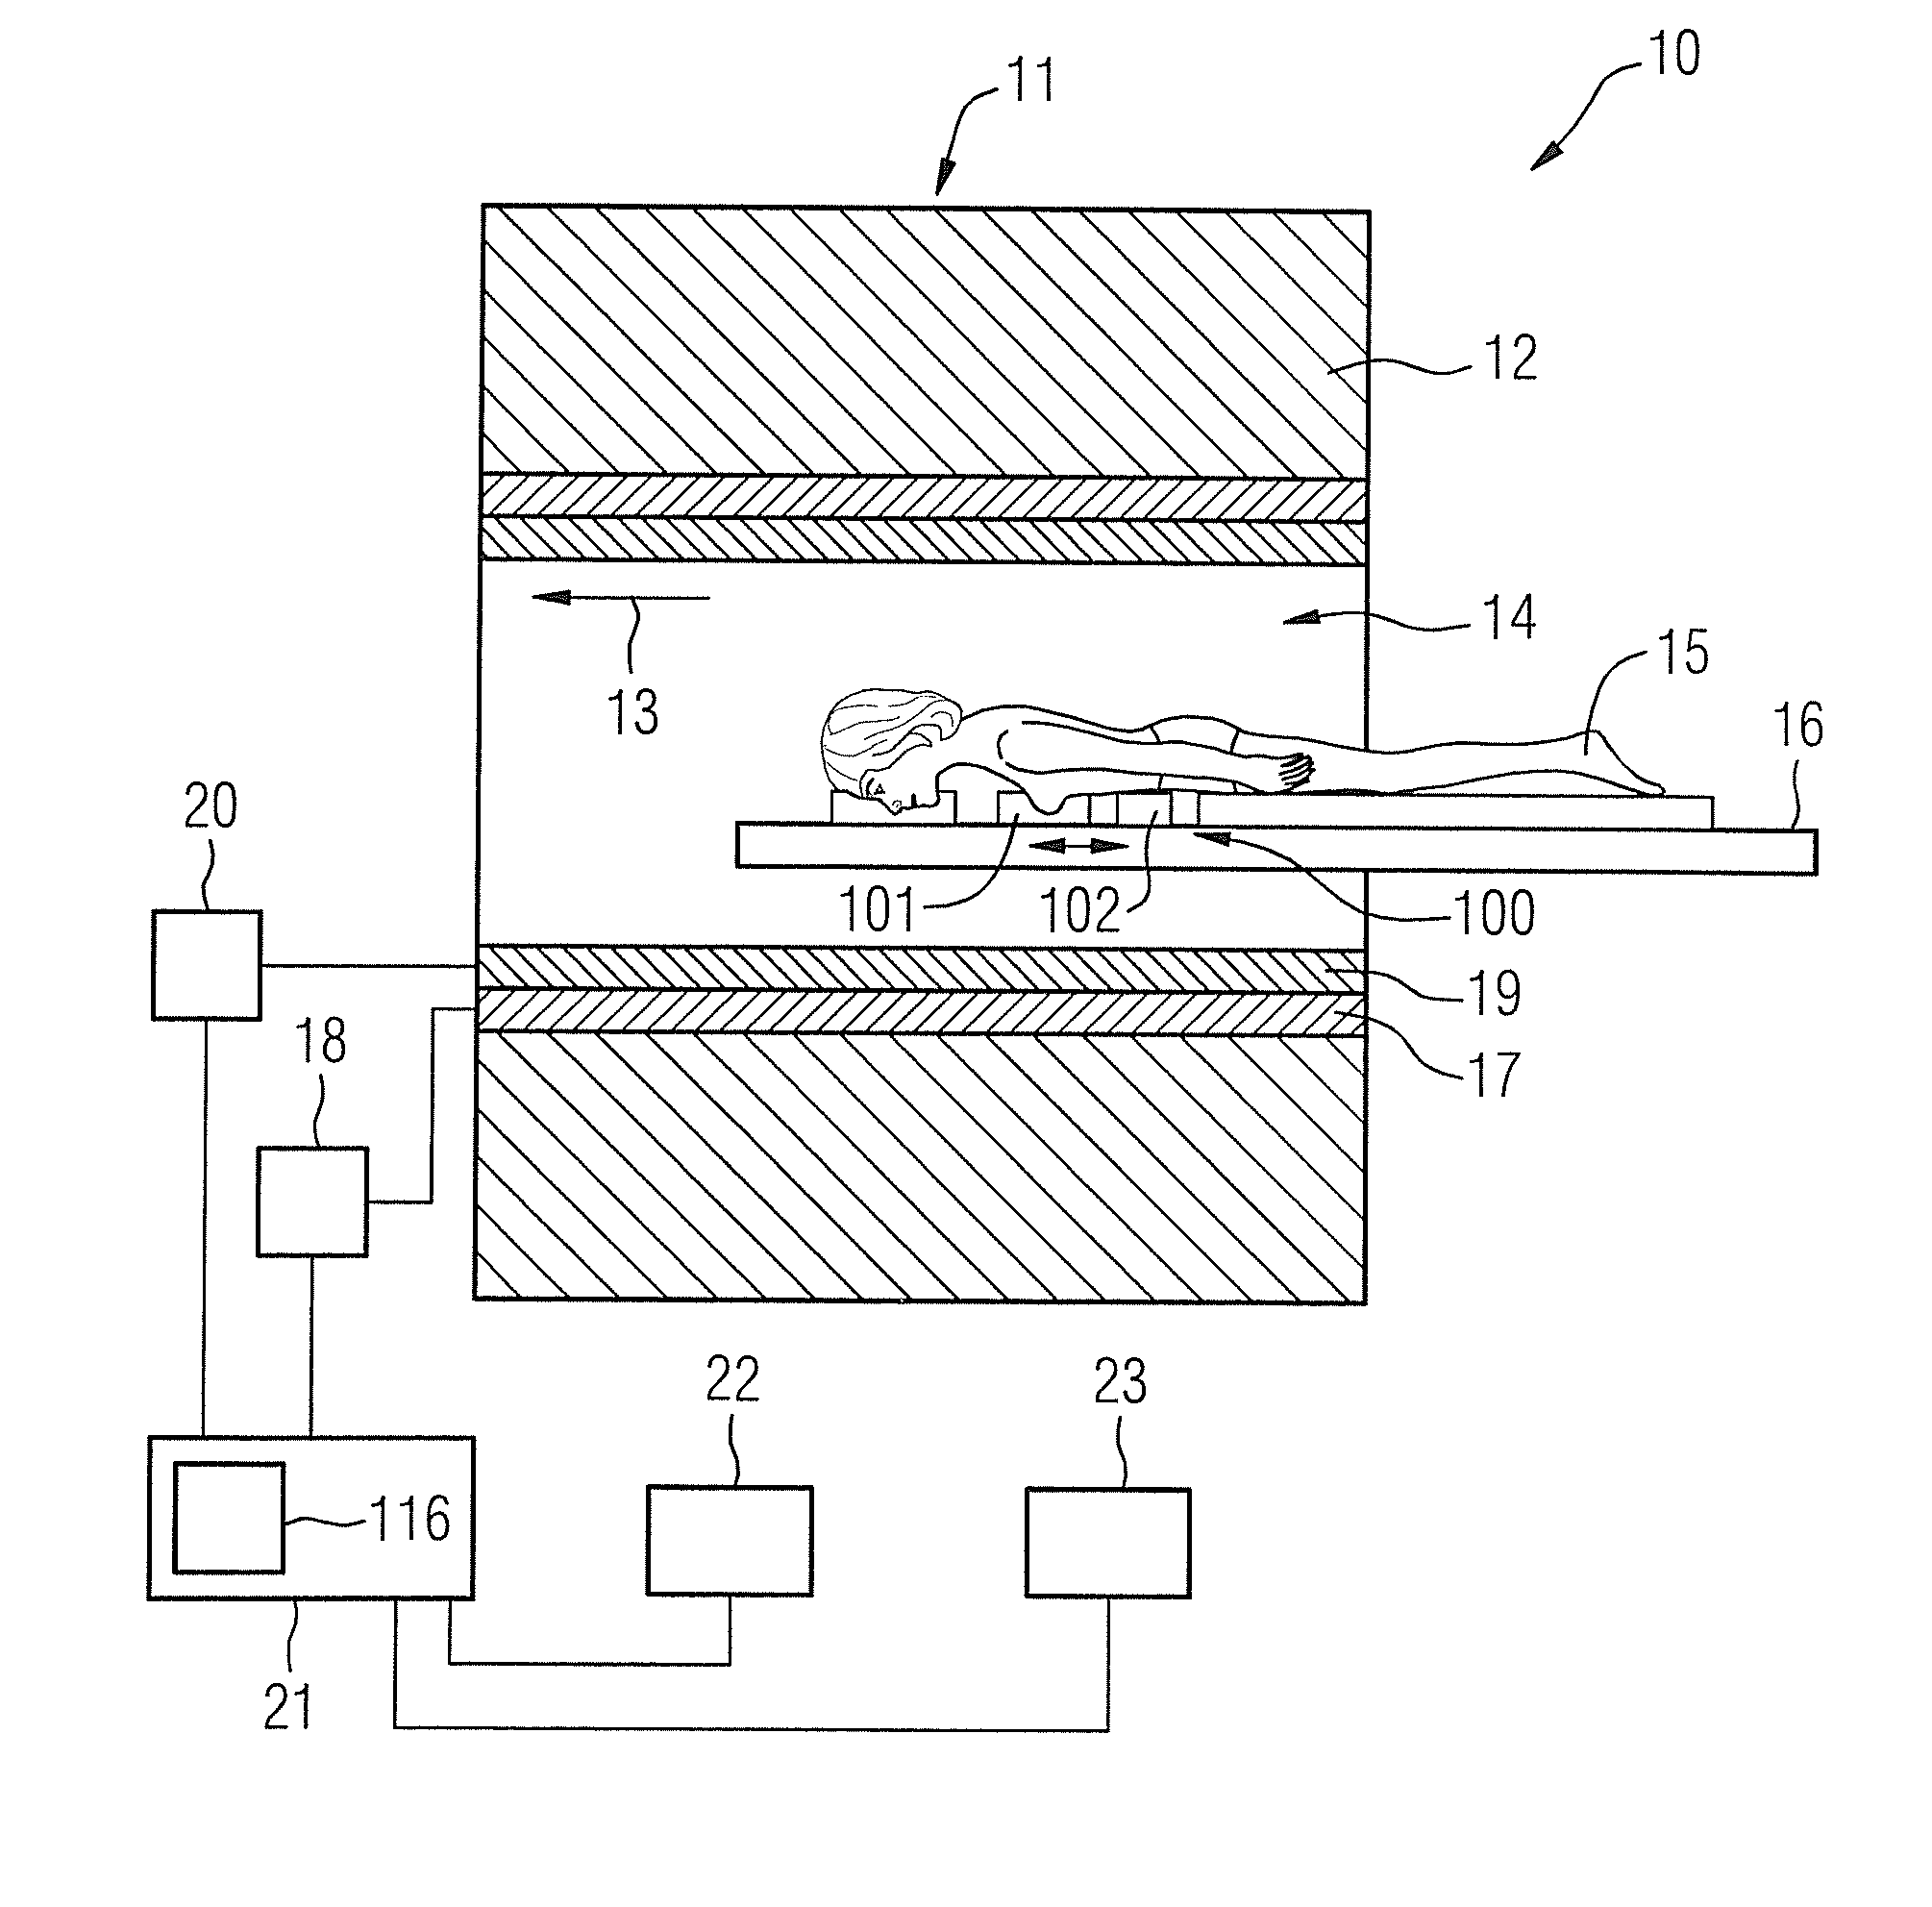 Shim coil device and a magnetic resonance coil system having a shim coil device